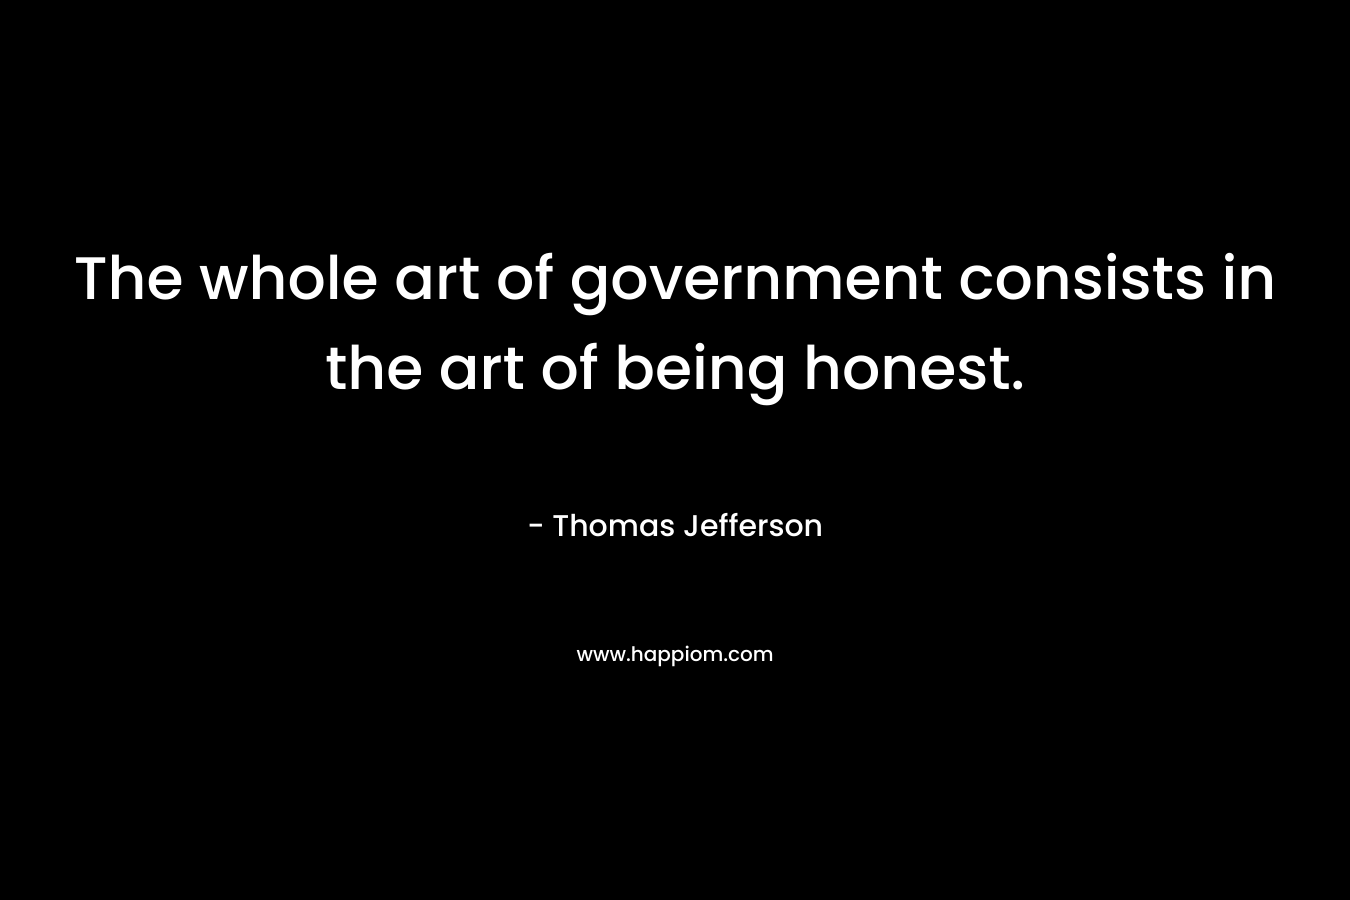 The whole art of government consists in the art of being honest. – Thomas Jefferson